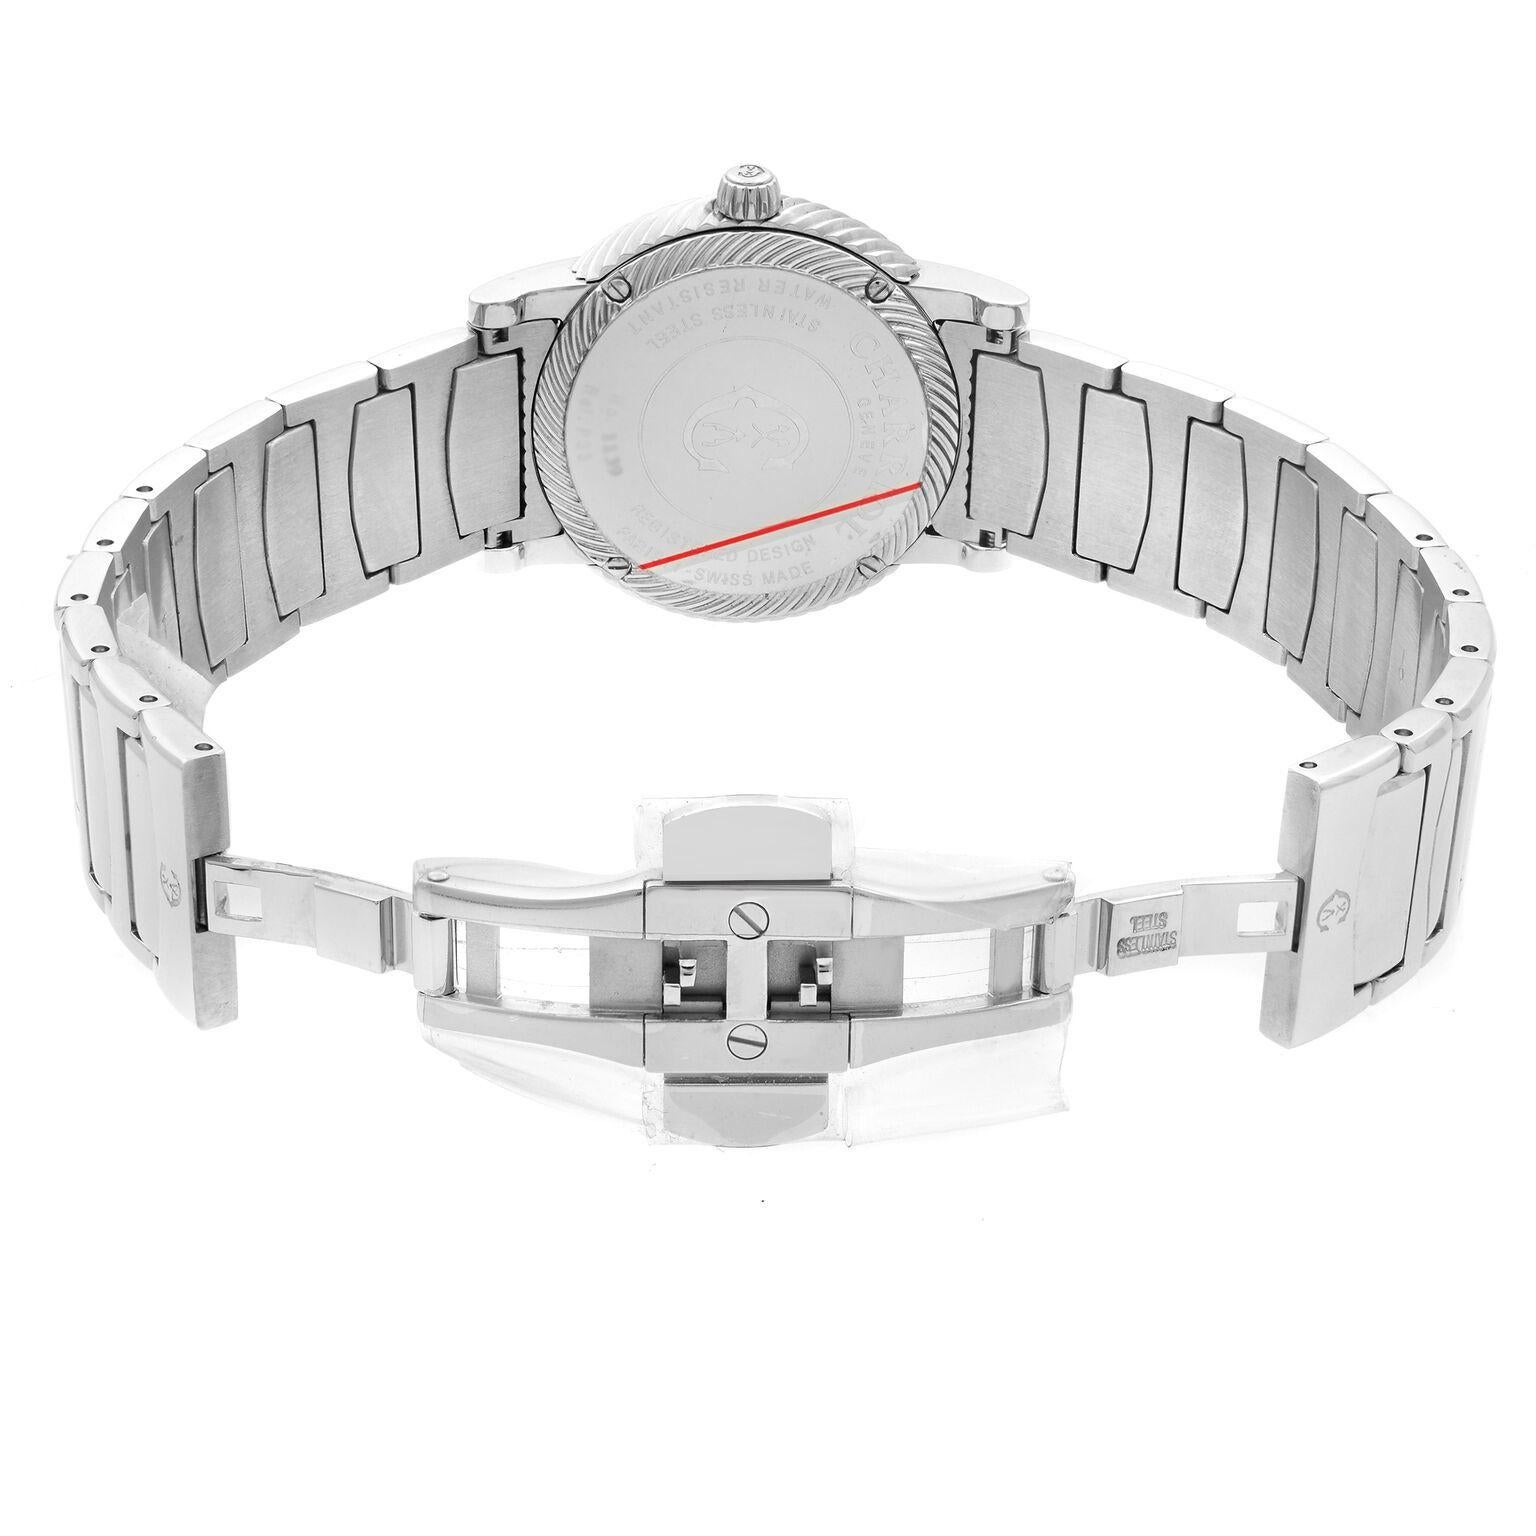 Charriol Parisii Steel Diamond White MOP Dial Quartz Ladies Watch P33S2.920.001 In New Condition For Sale In New York, NY